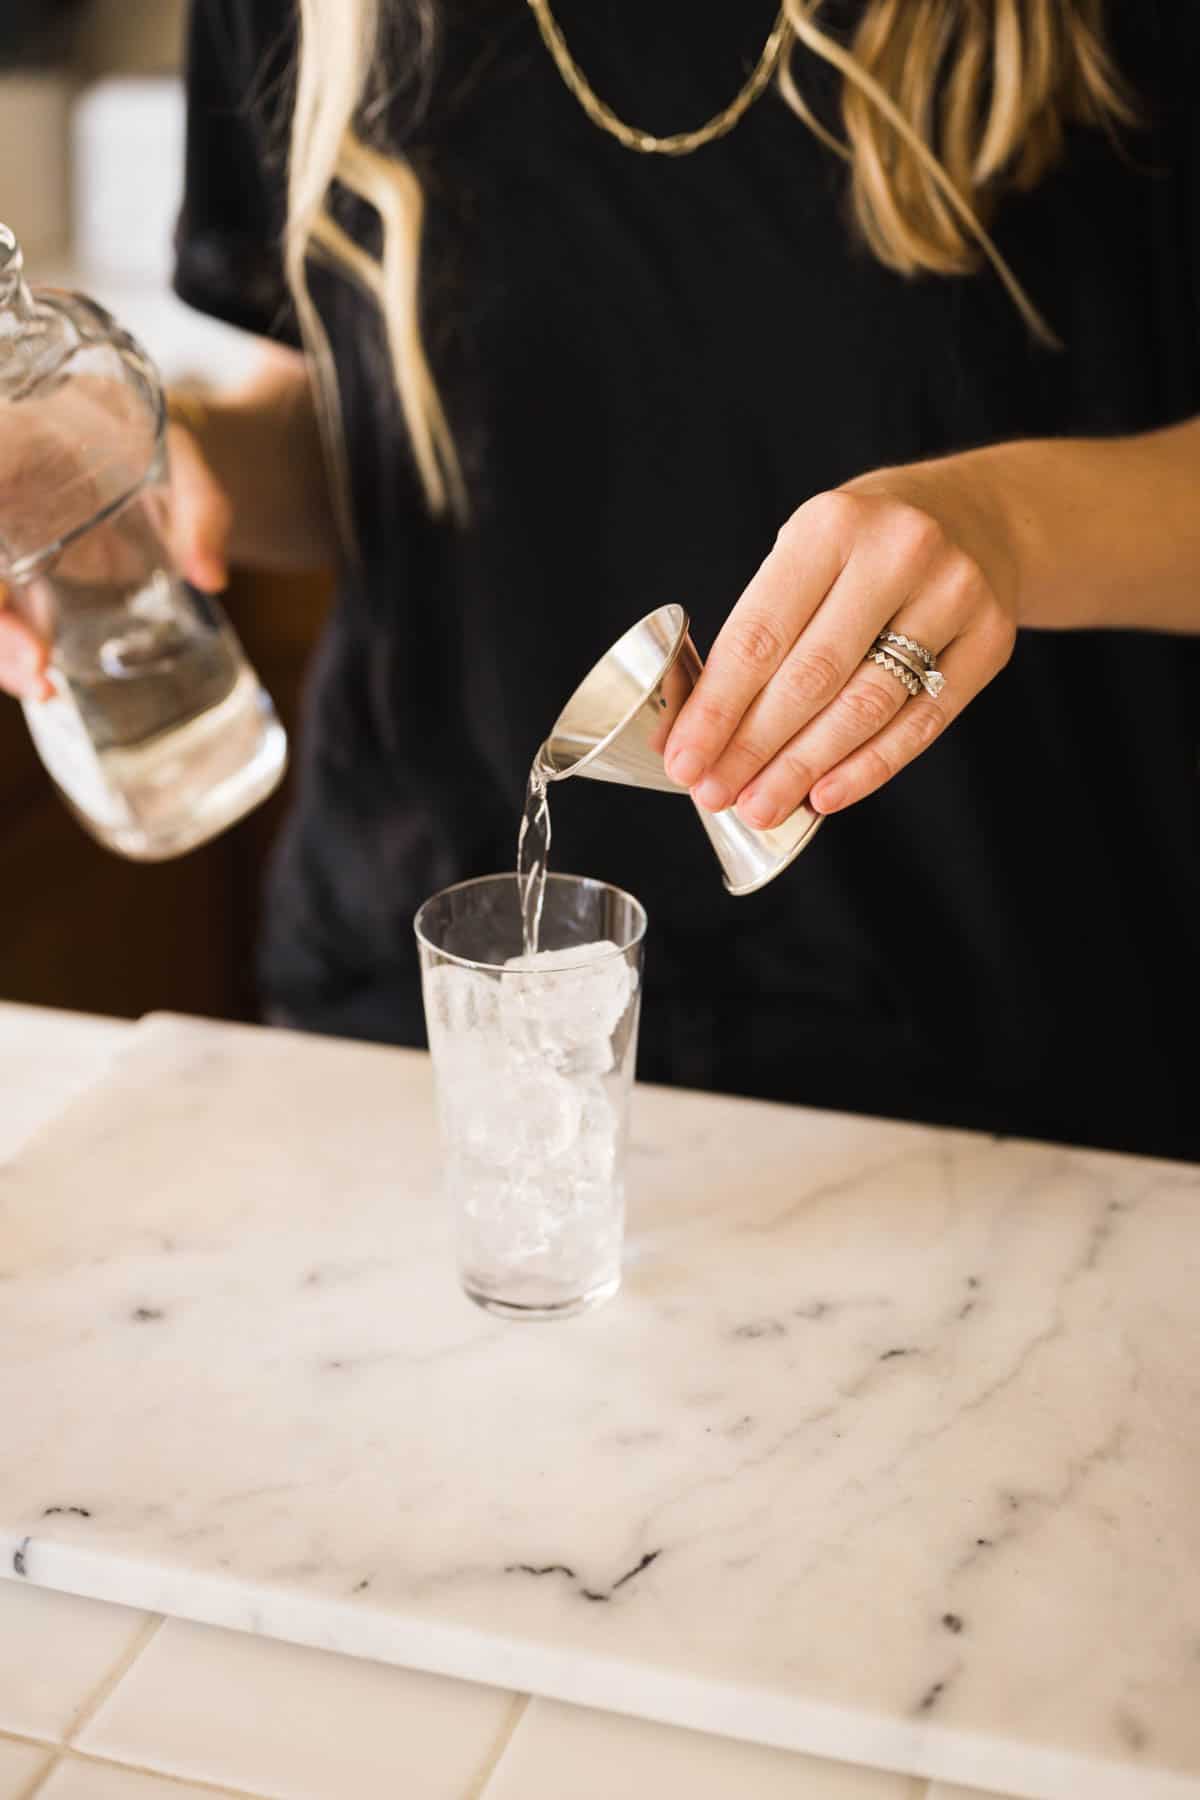 Woman adding tequila to a cocktail glass.